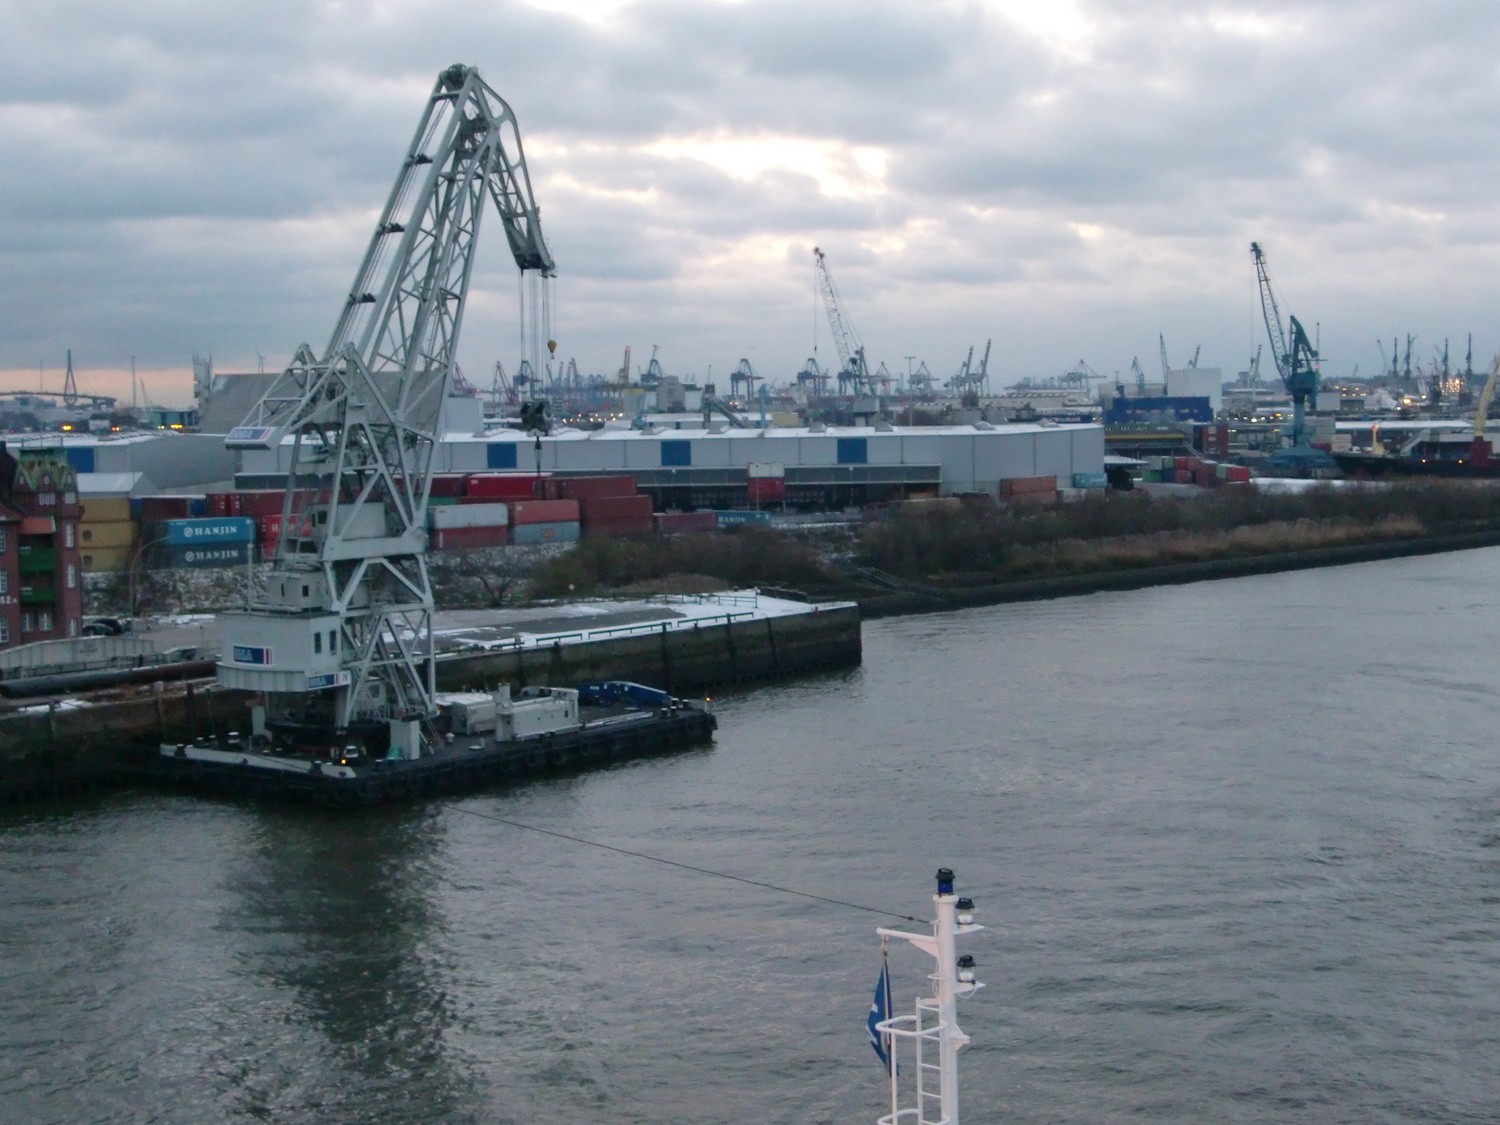 International port of Hamburg, where we boarded our vessel